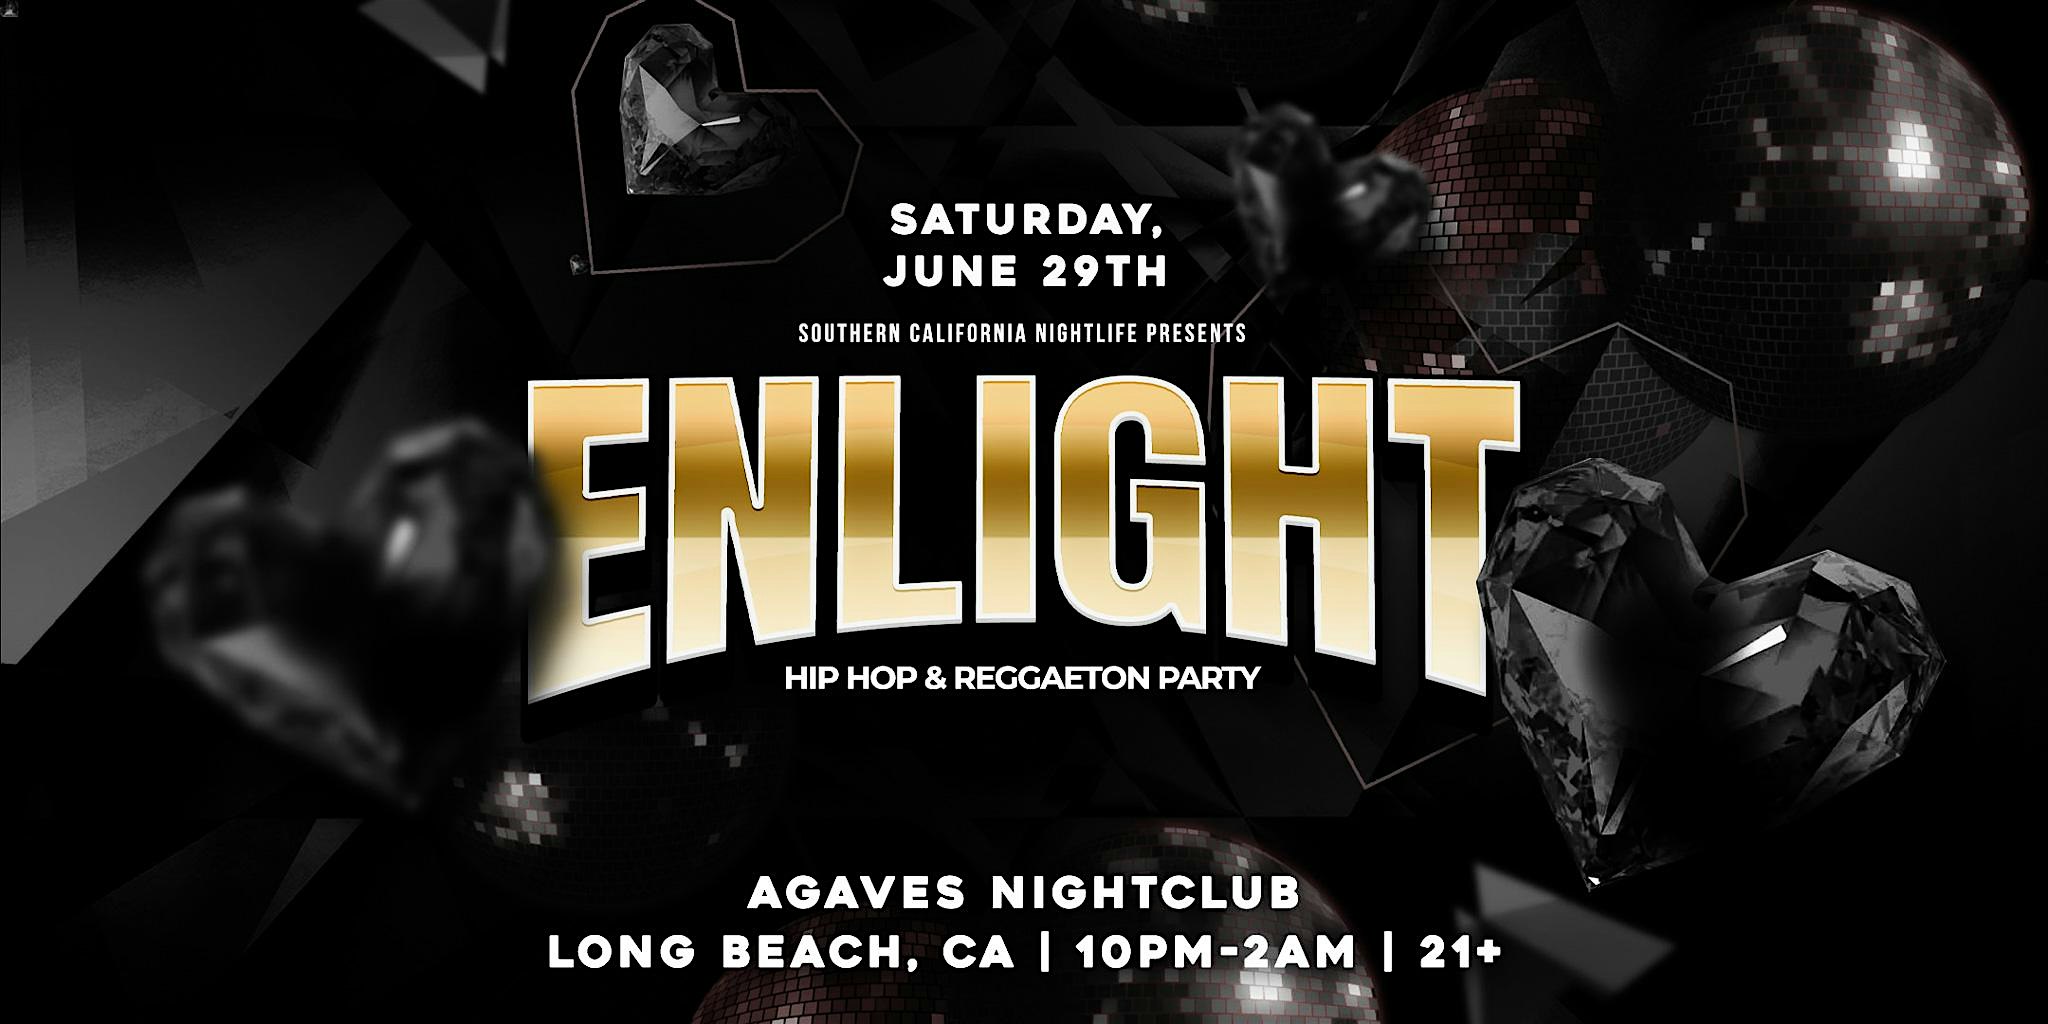 Enlight: Hip Hop and Reggaeton Party 21+ in downtown Long Beach, CA!